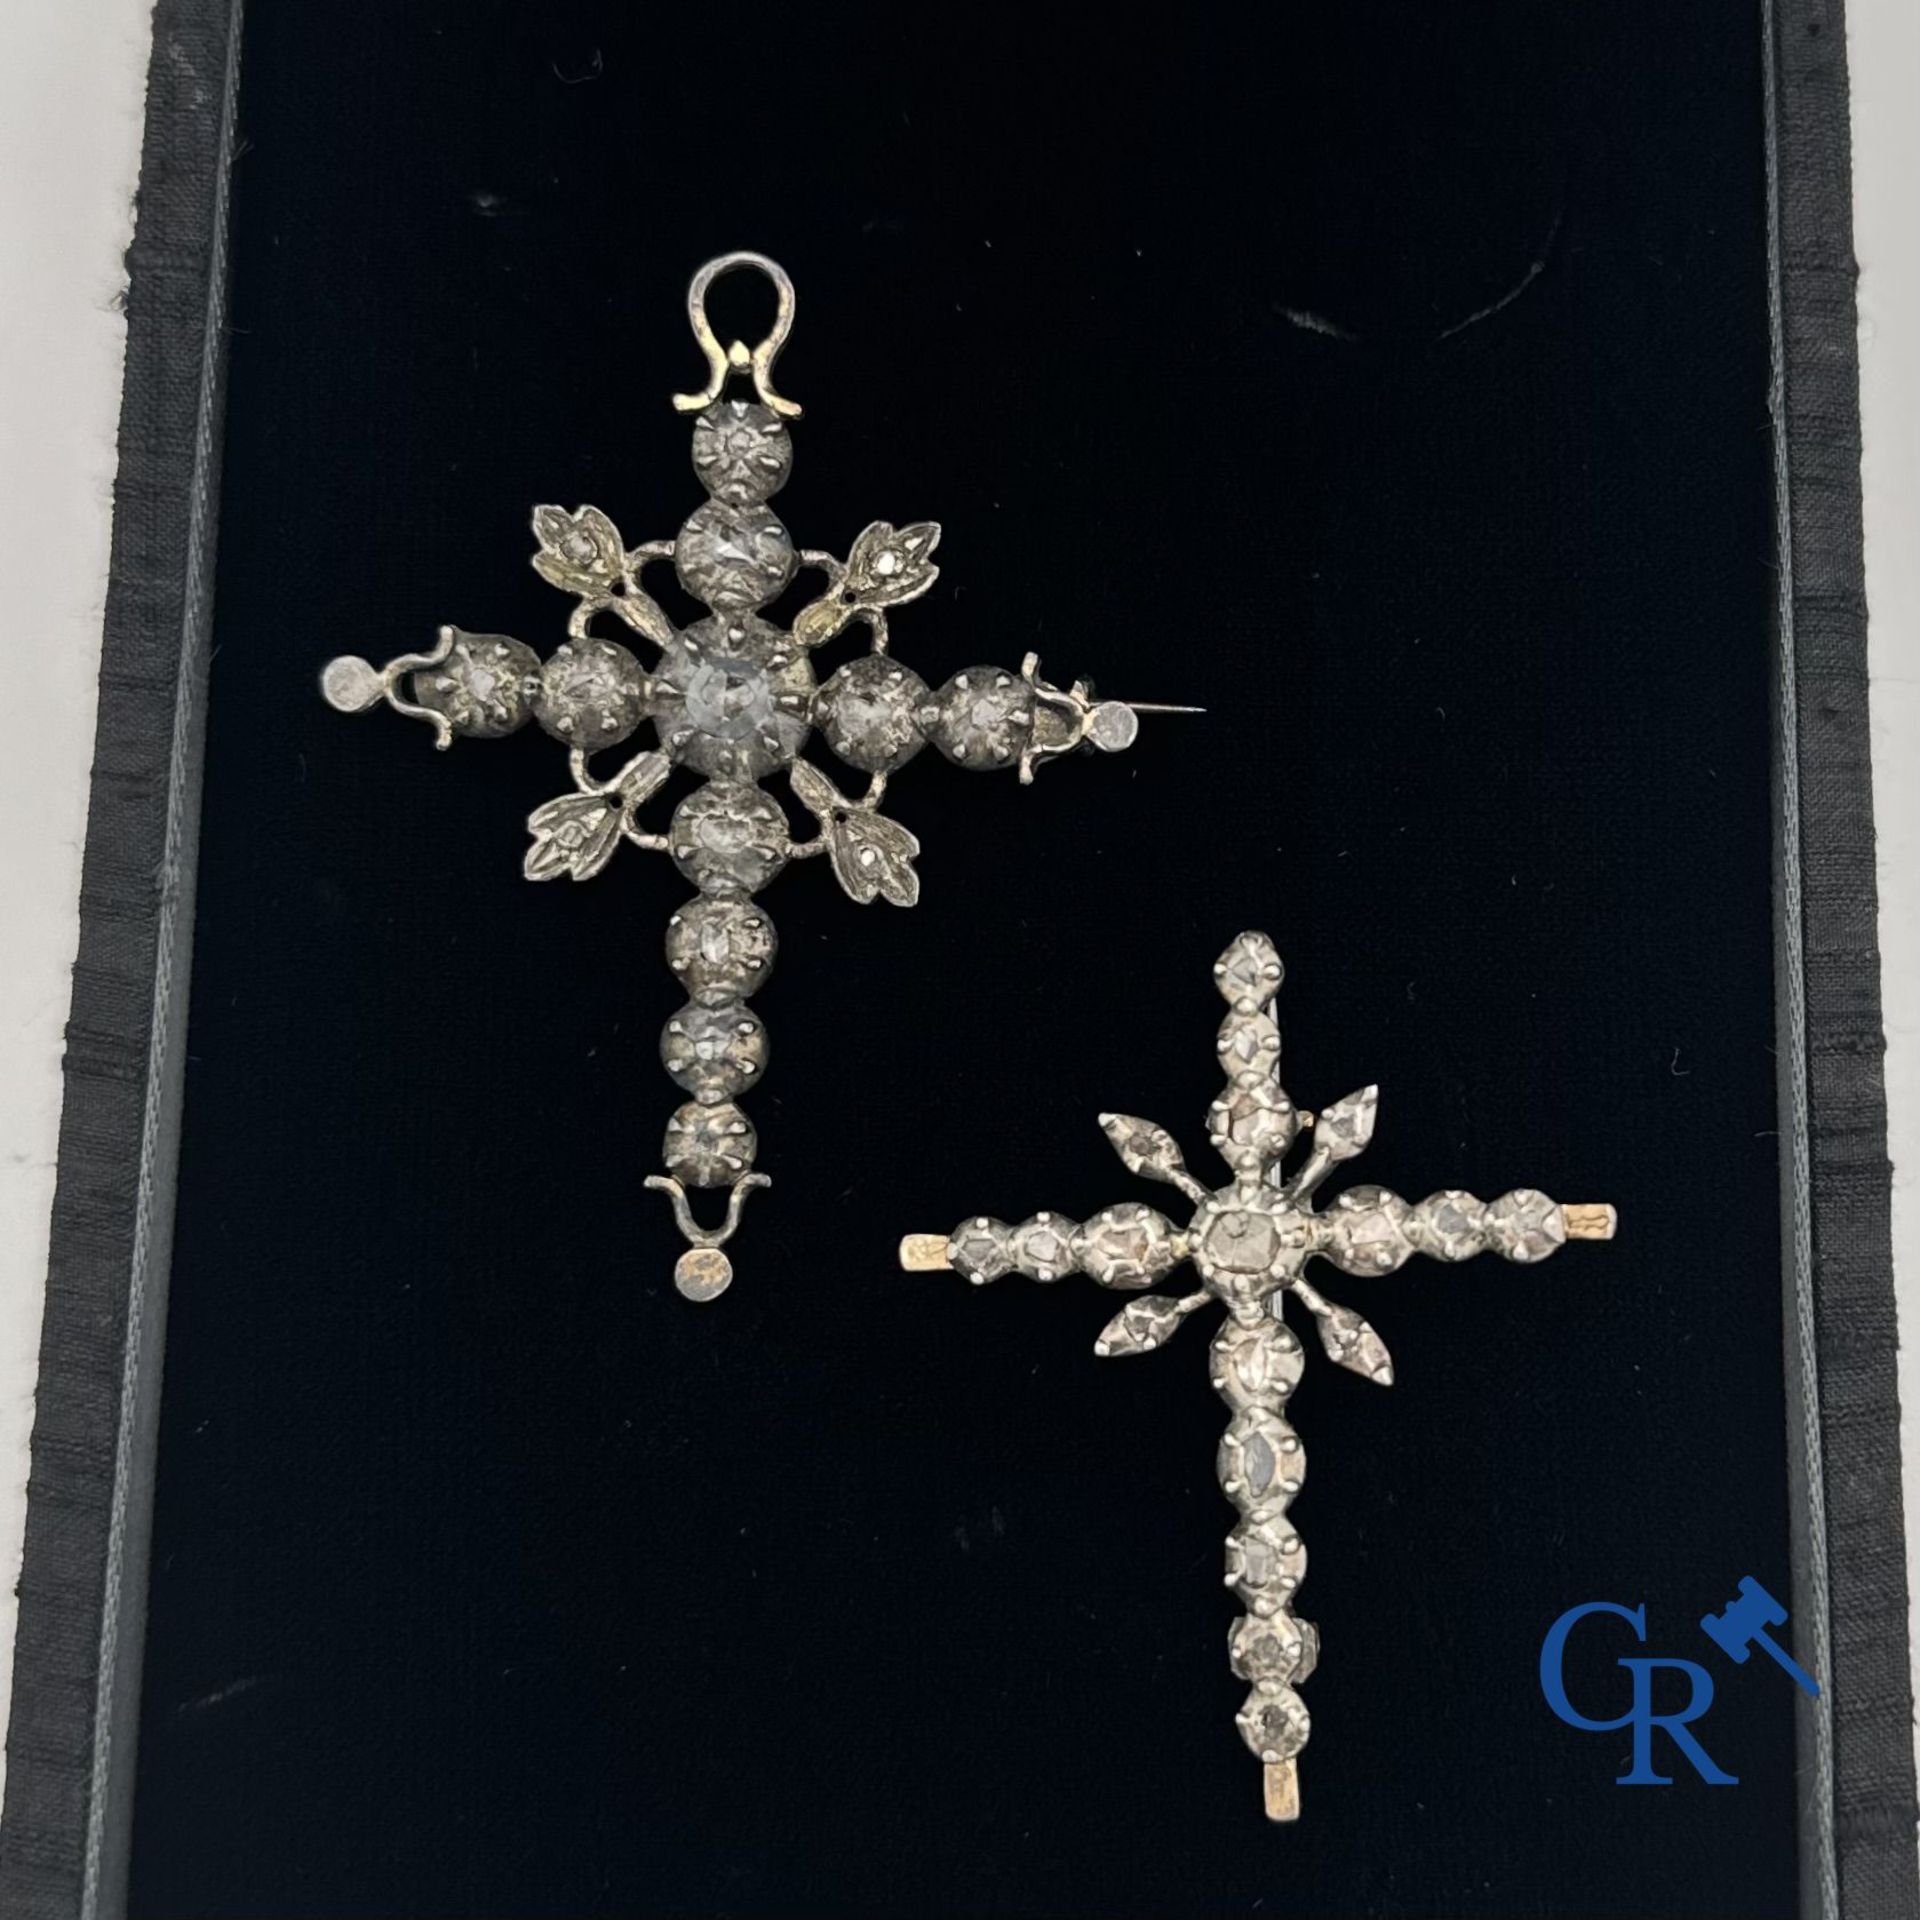 Jewellery: Lot of 2 Flemish crosses in silver and diamond.